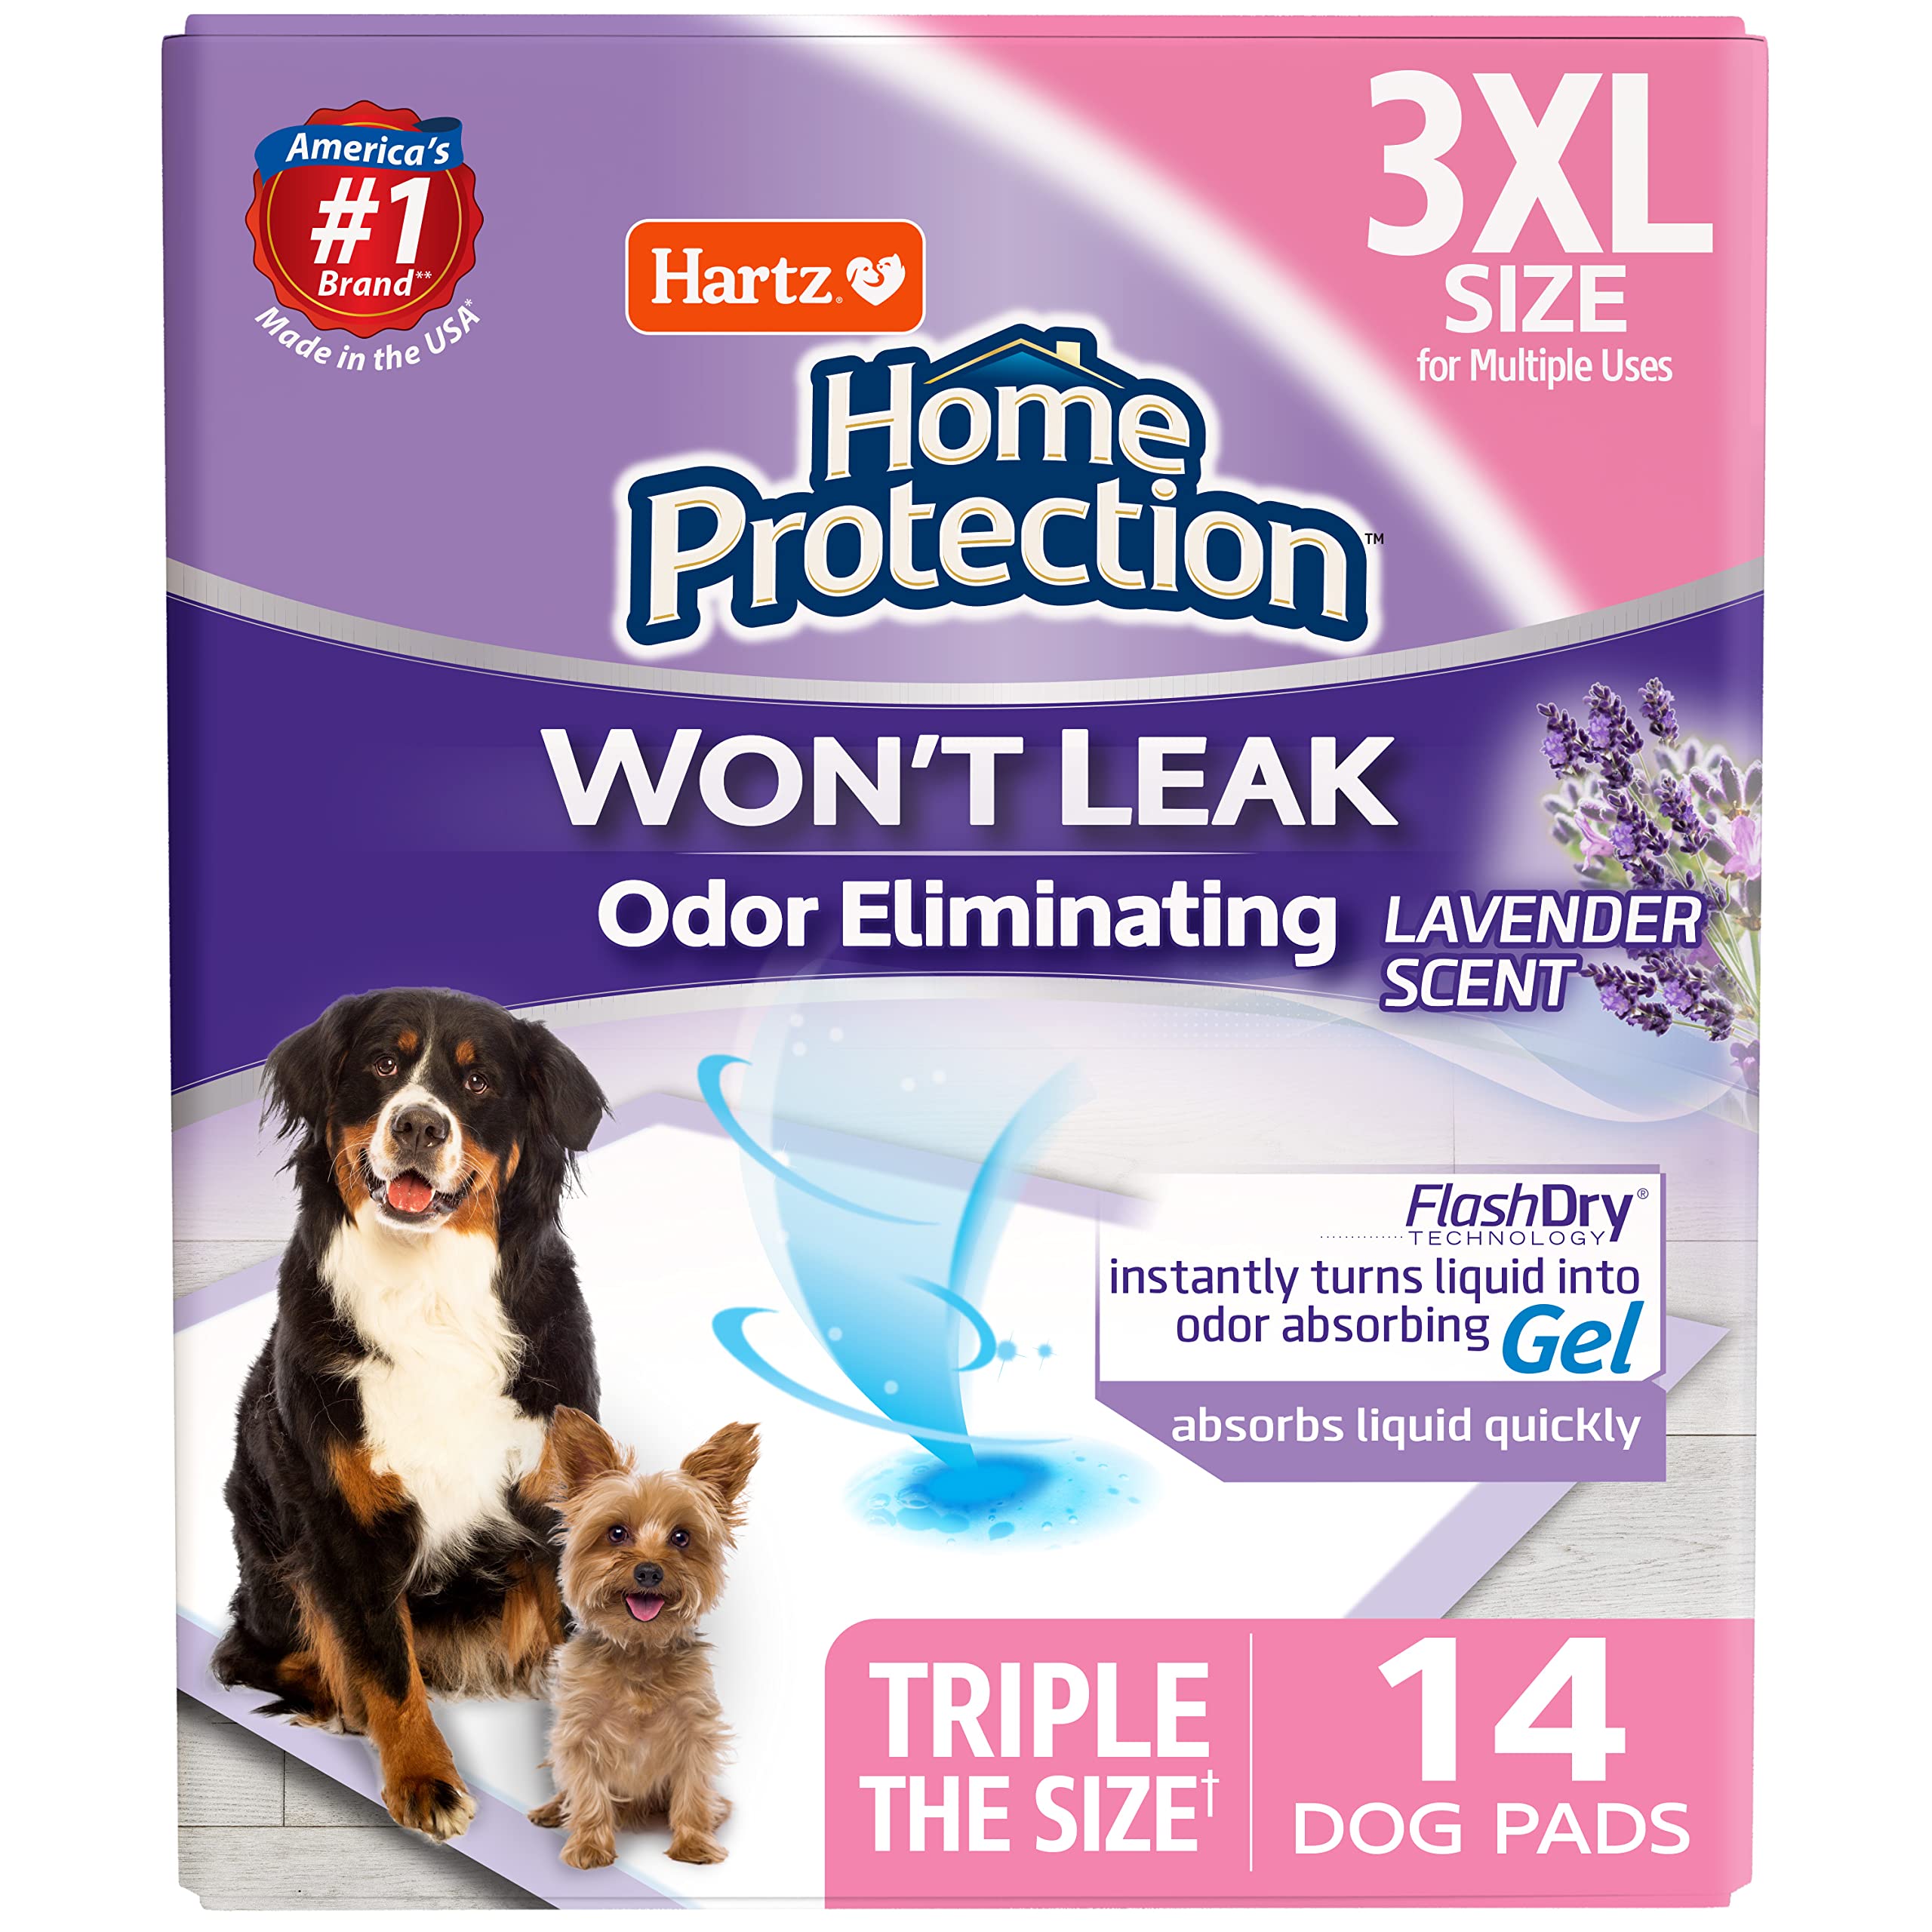 Hartz Home Protection Odor Eliminating 3XL Dog Pads with FlashDry Technology, Scented Triple Extra Large Pads for Dogs & Puppies, Count Size Varies